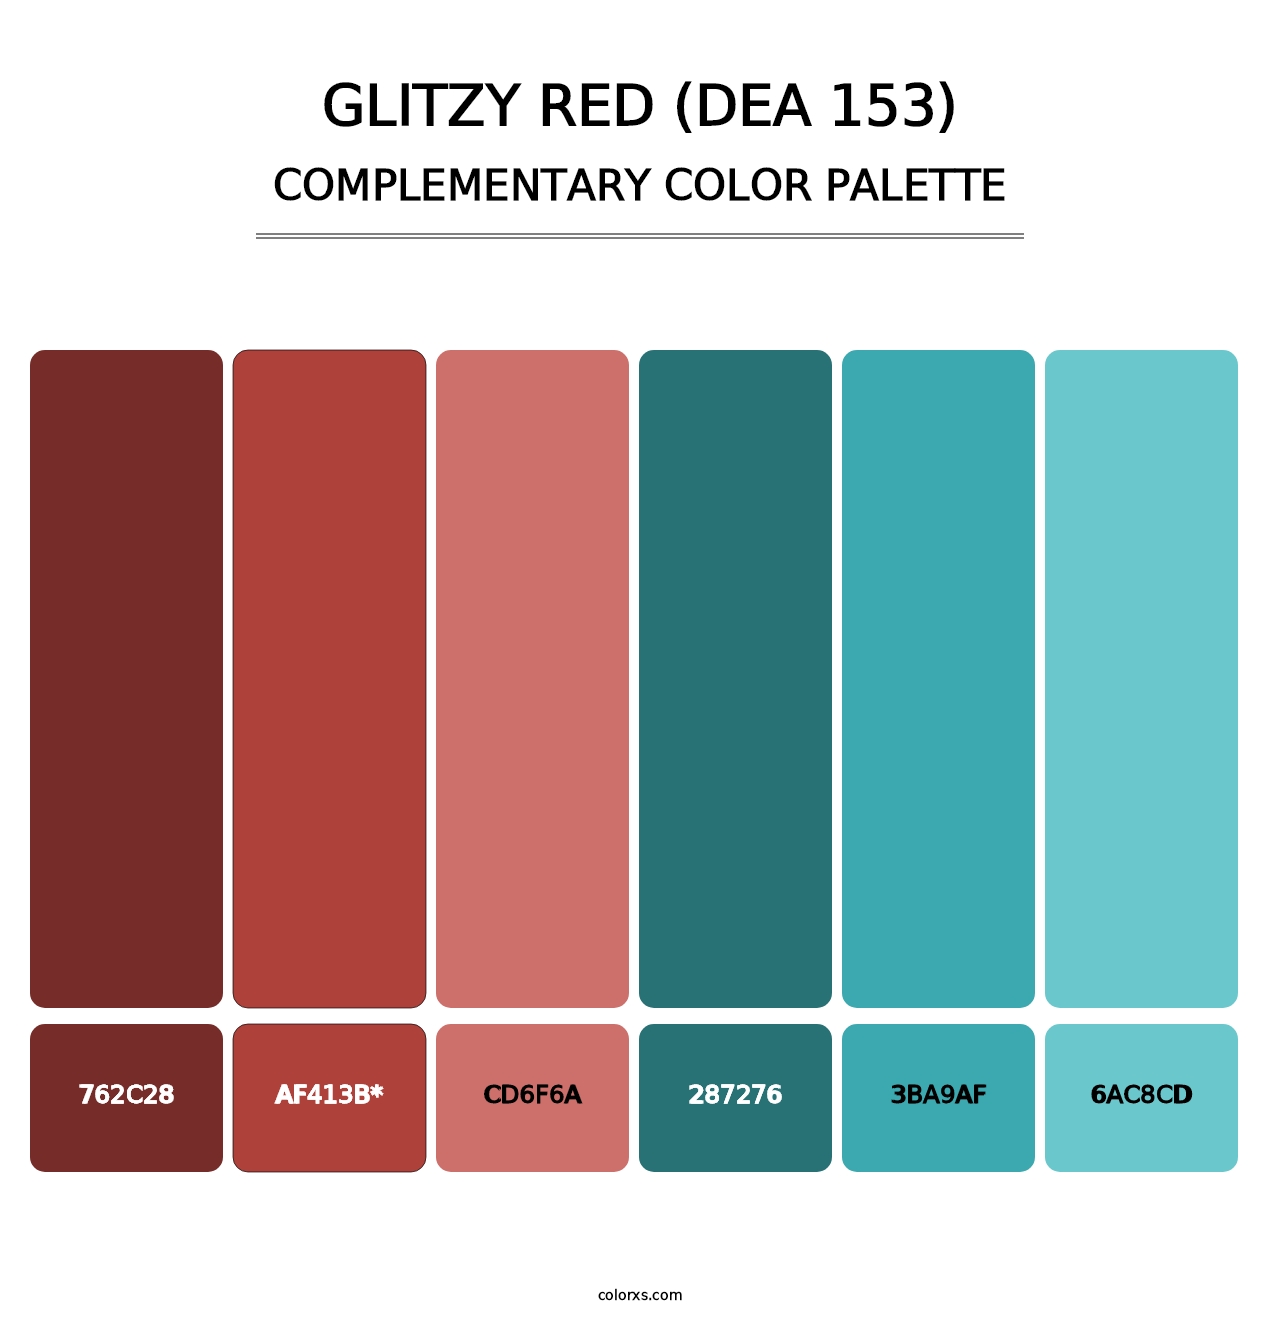 Glitzy Red (DEA 153) - Complementary Color Palette